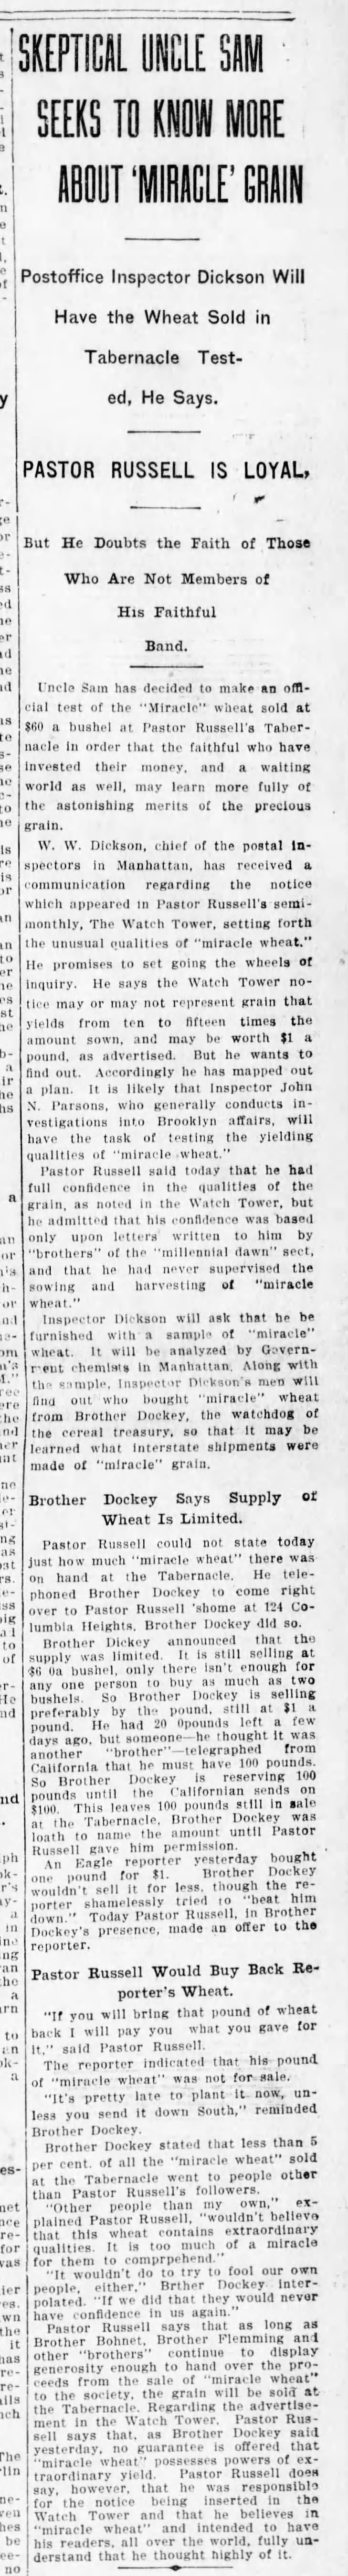 Skeptical Uncle Sam Seeks to Know More About 'Miracle' Grain, Sept. 22, 1911